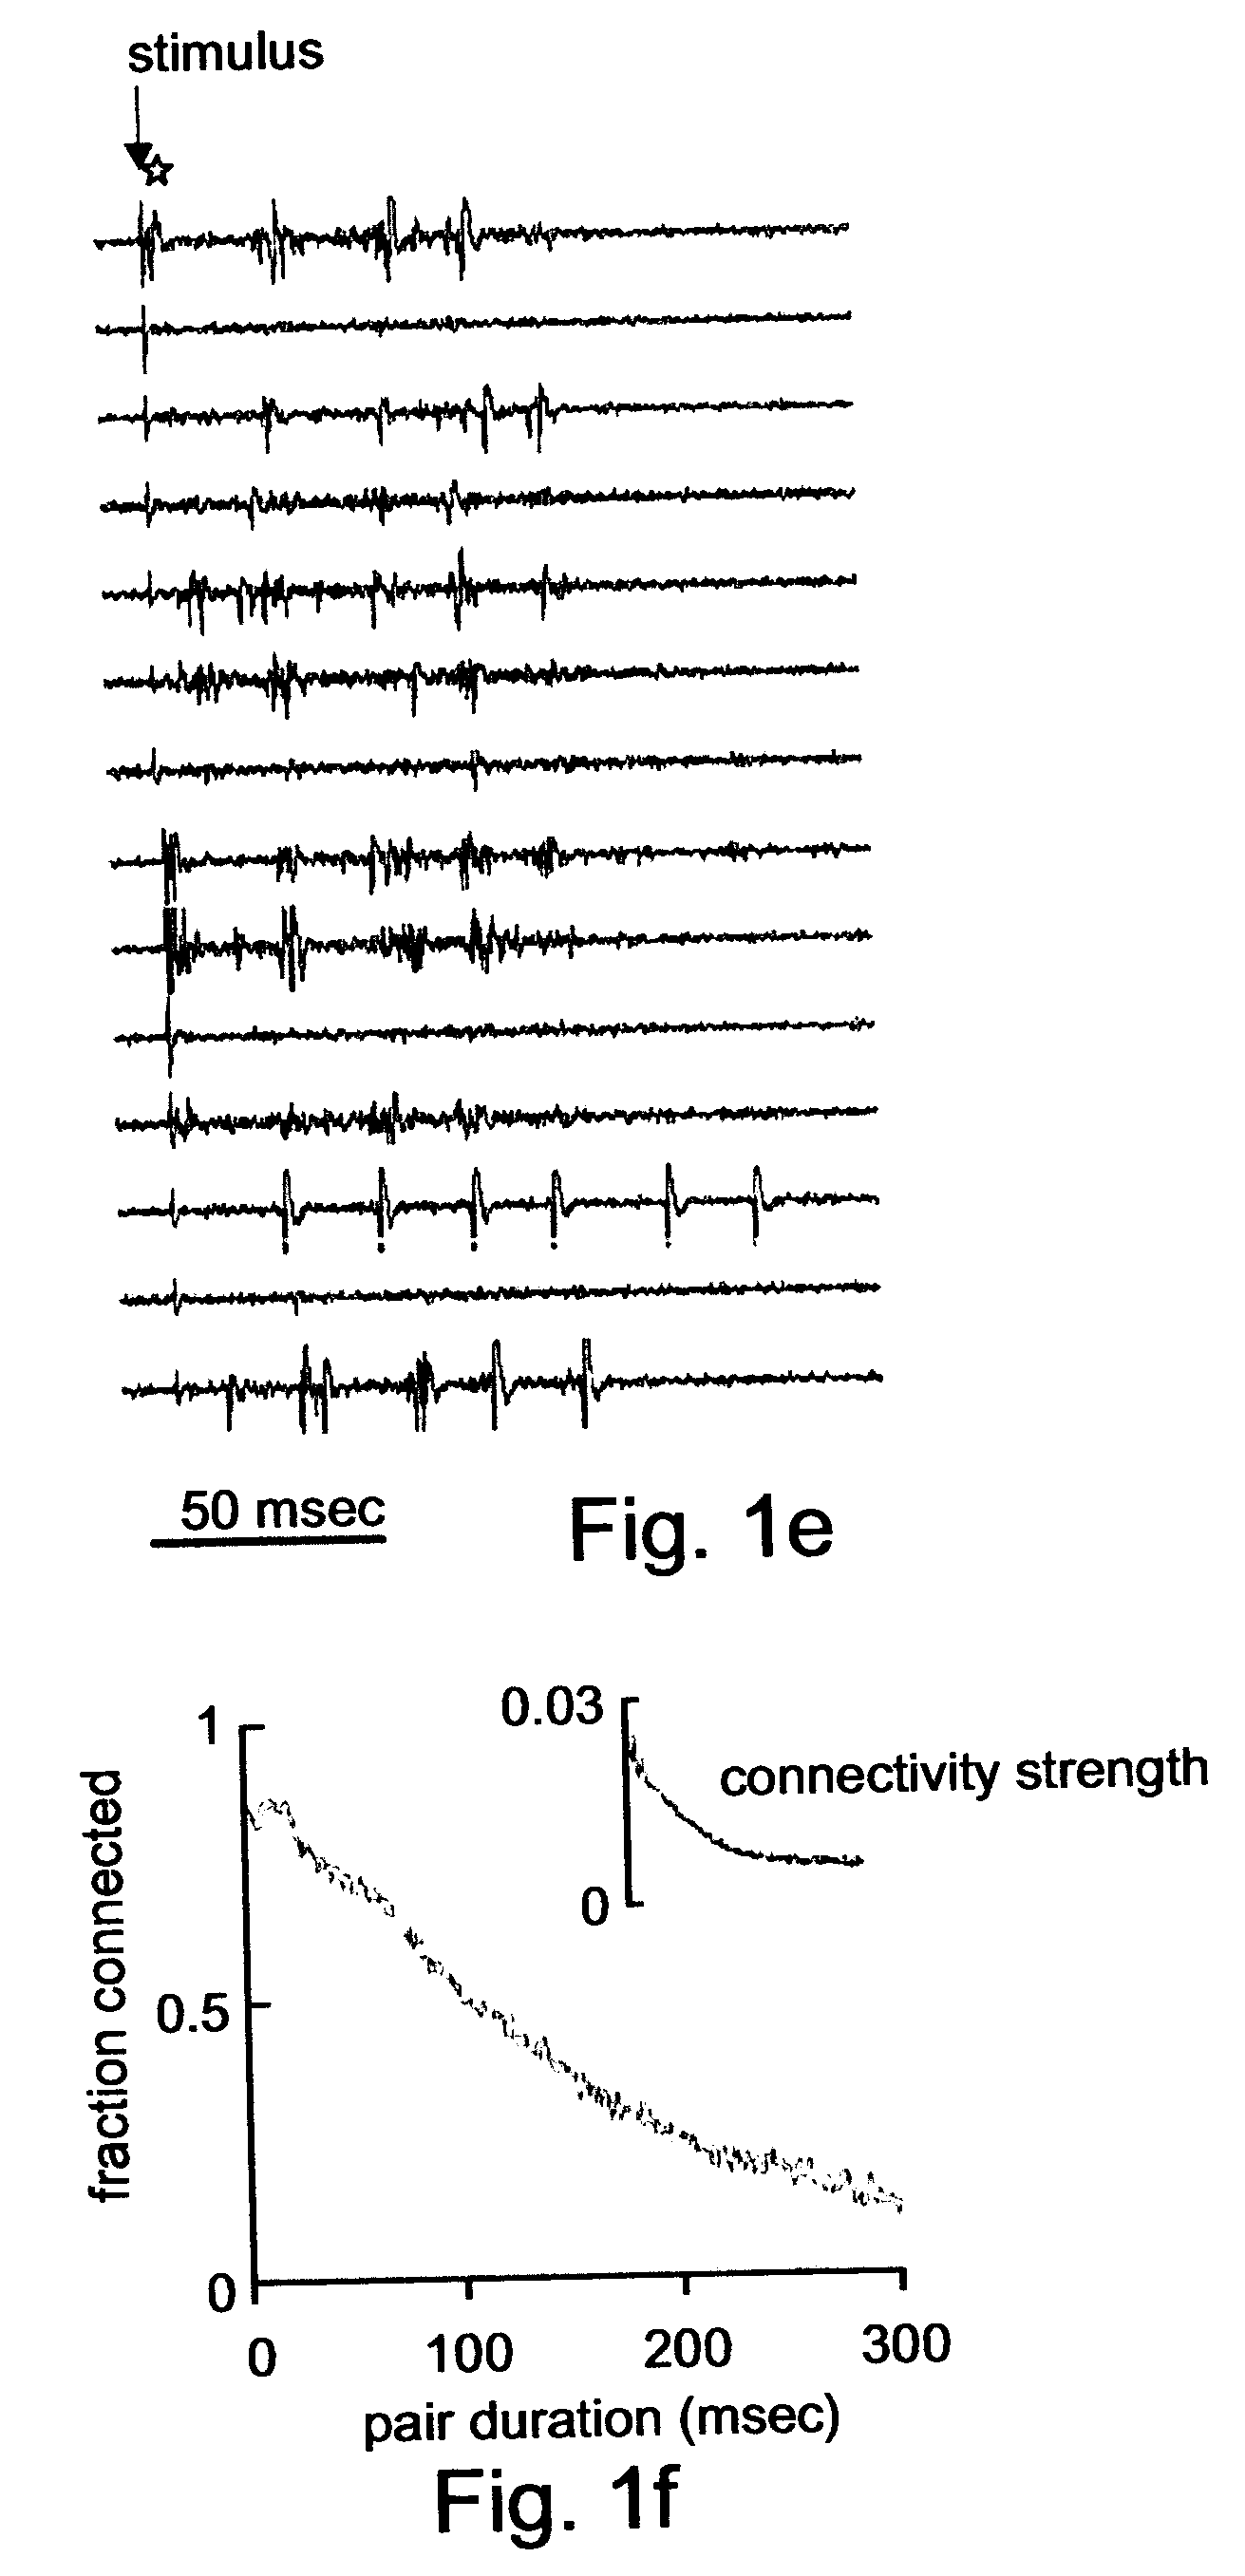 Nucleic acid constructs and cells, and methods utilizing same for modifying the electrophysiological function of excitable tissues